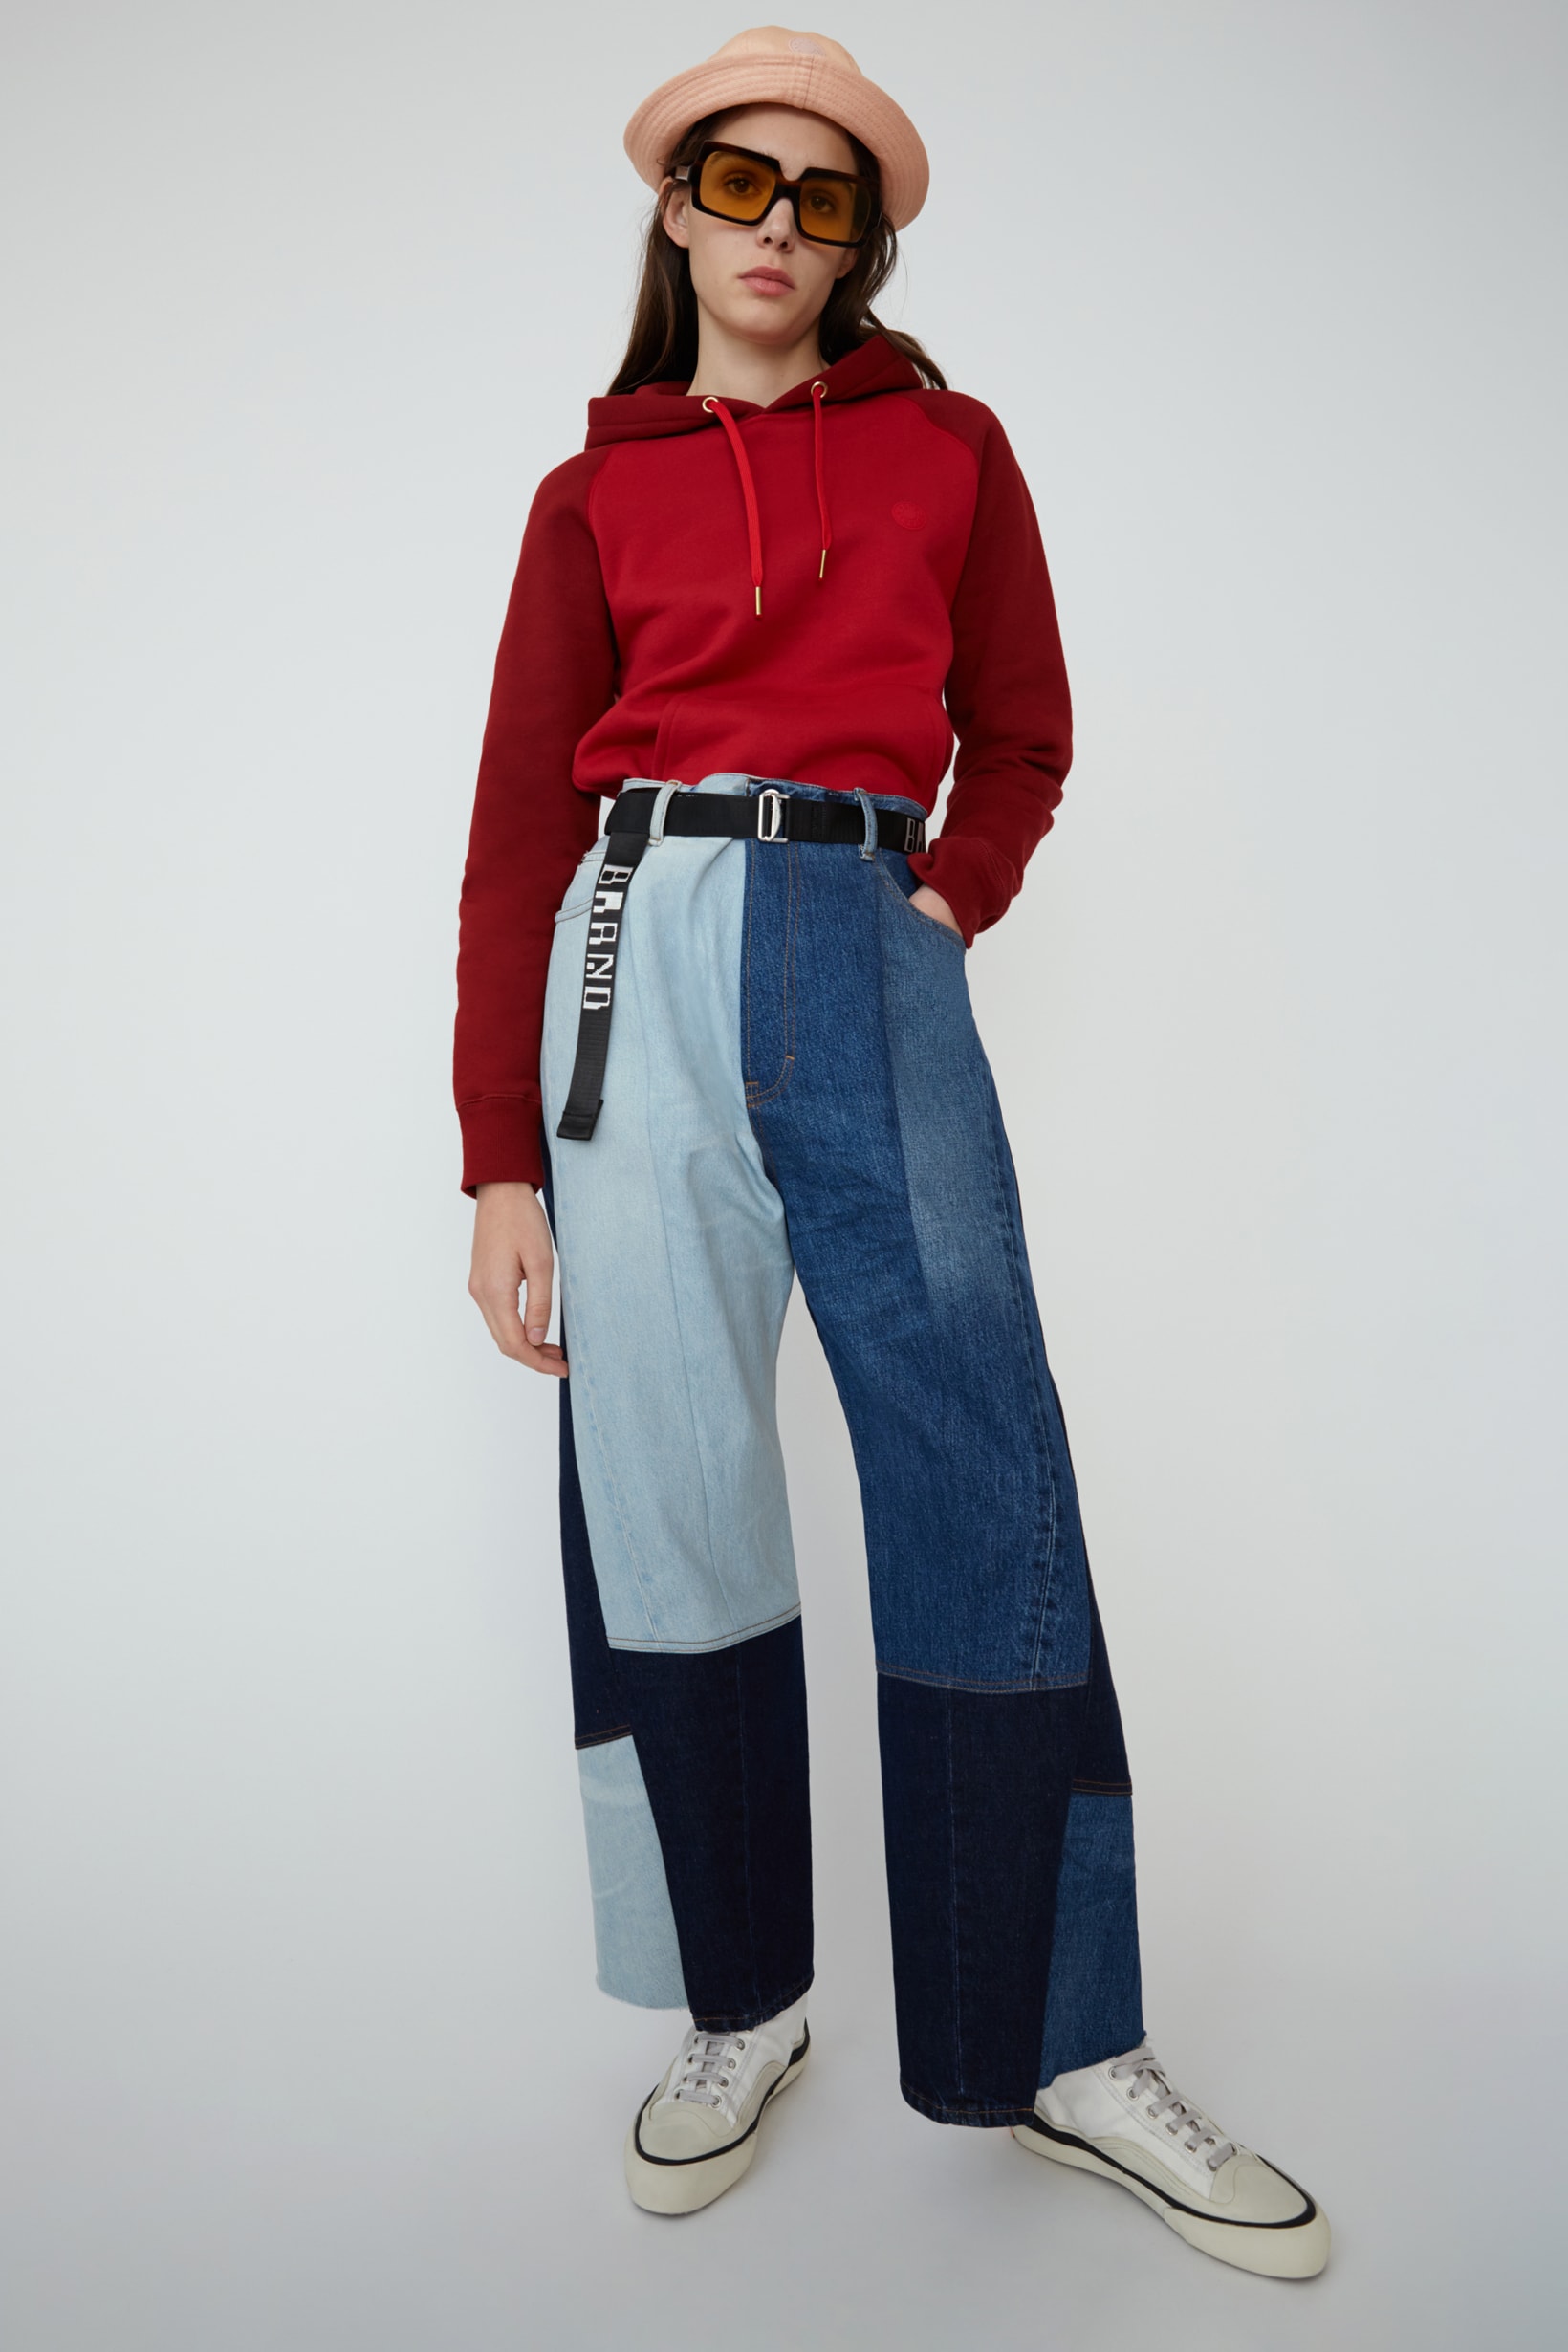 Acne Studios Spring Summer 2019 Denim Collection Sweater Red Pants Blue